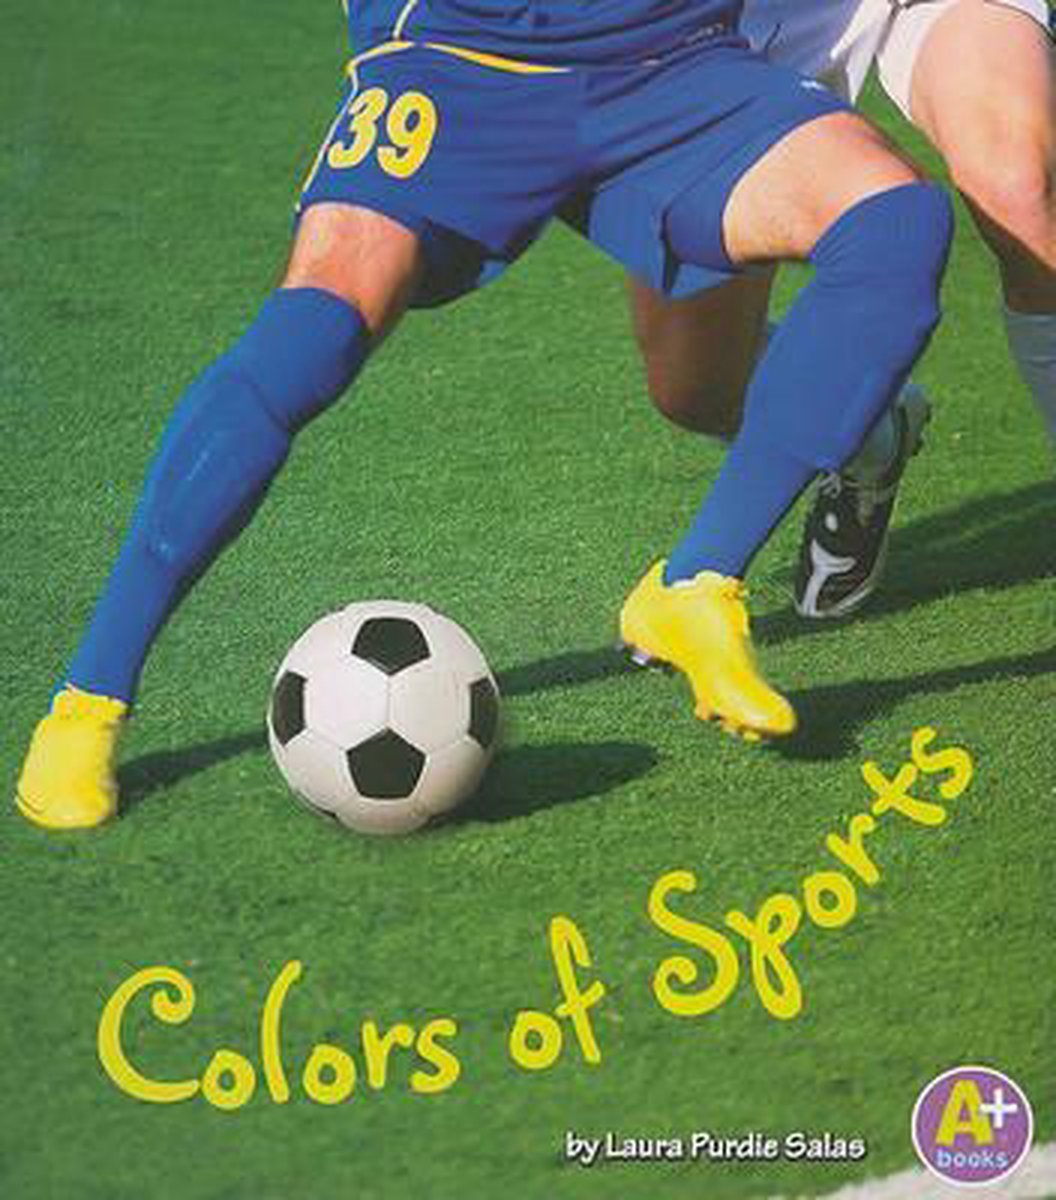 Colors of Sports (Colors All Around) - Laura Purdie Salas